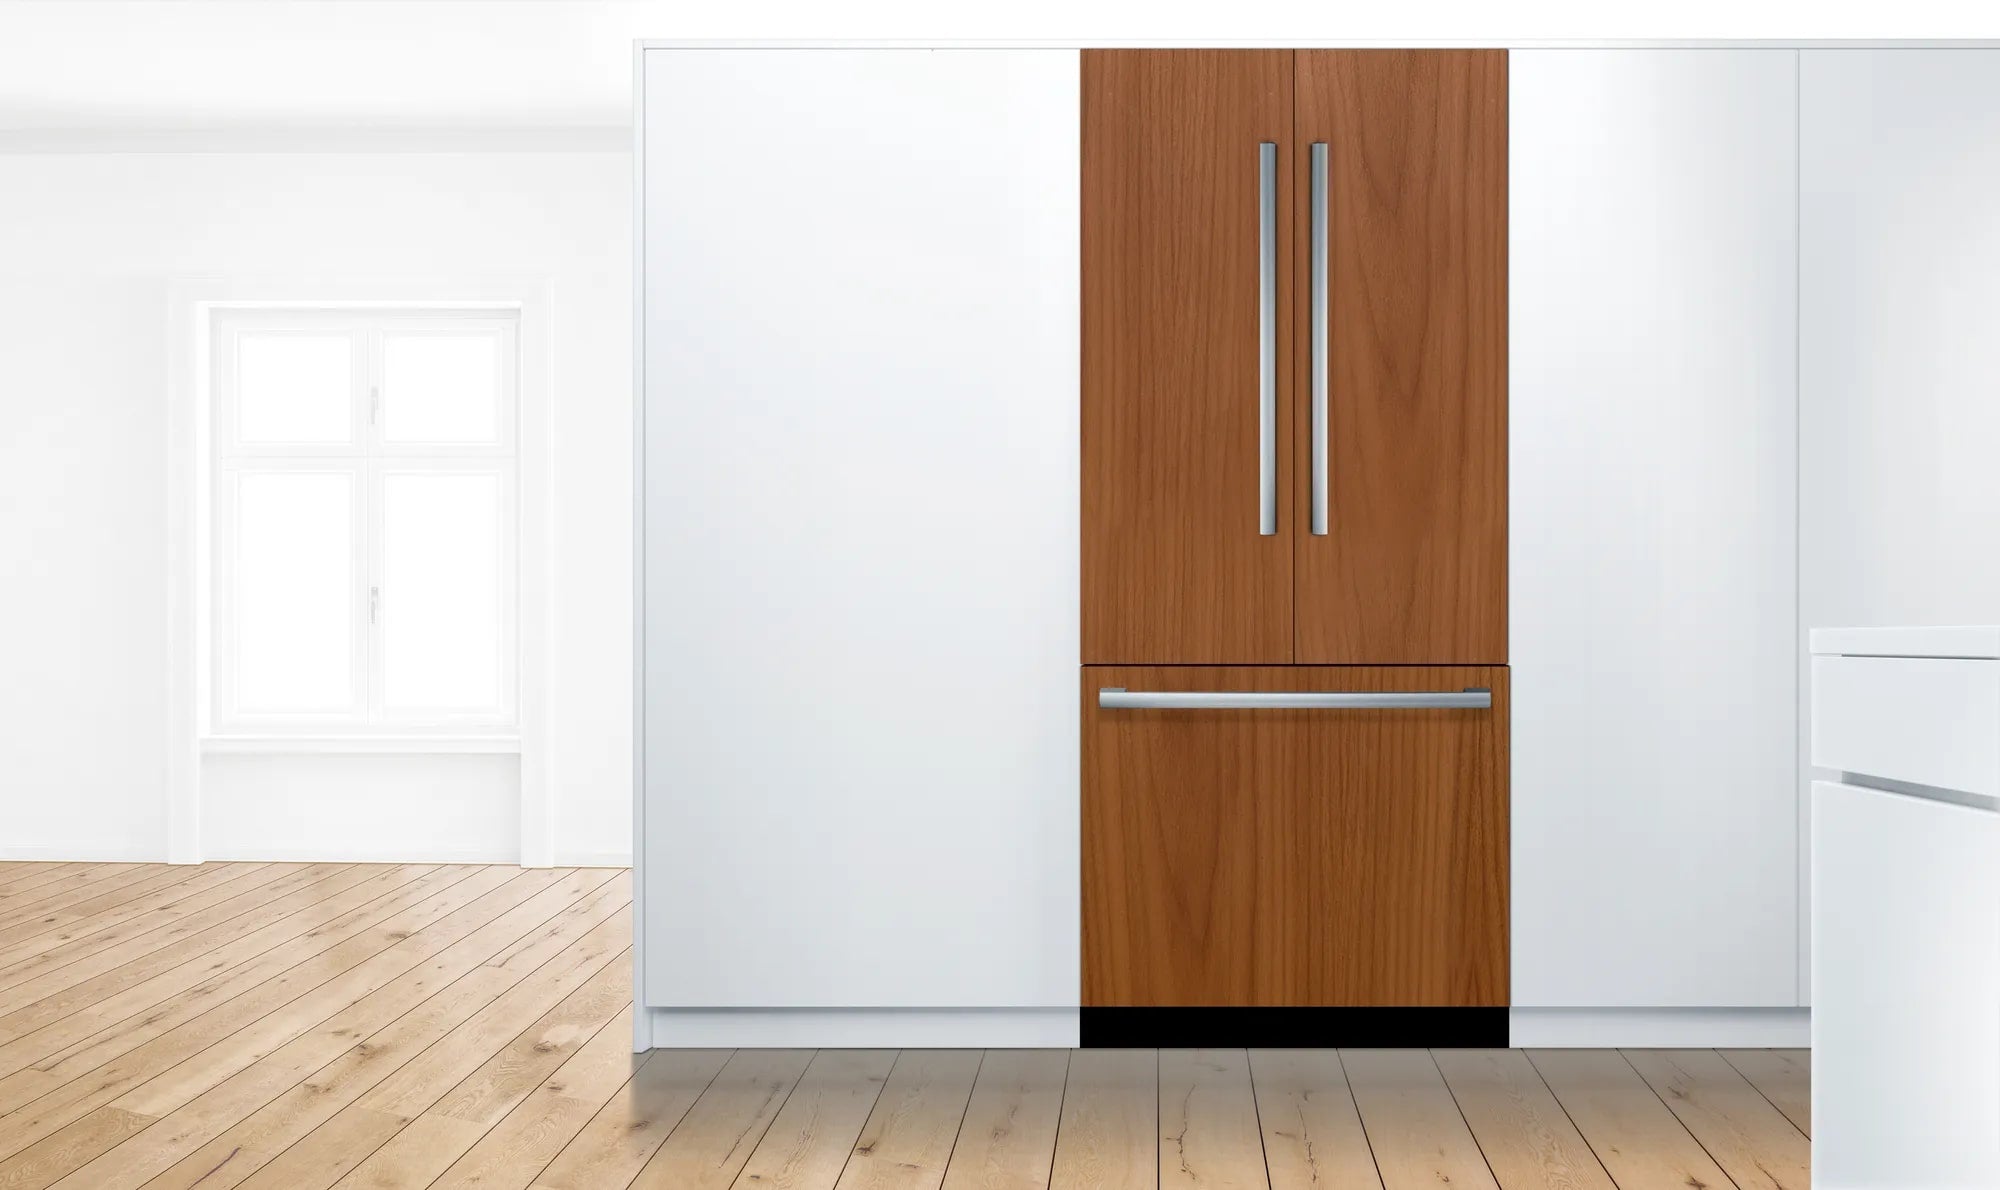 Bosch - 35.75 Inch 19.4 cu. ft Built In / Integrated French Door Refrigerator in Panel Ready - B36IT905NP